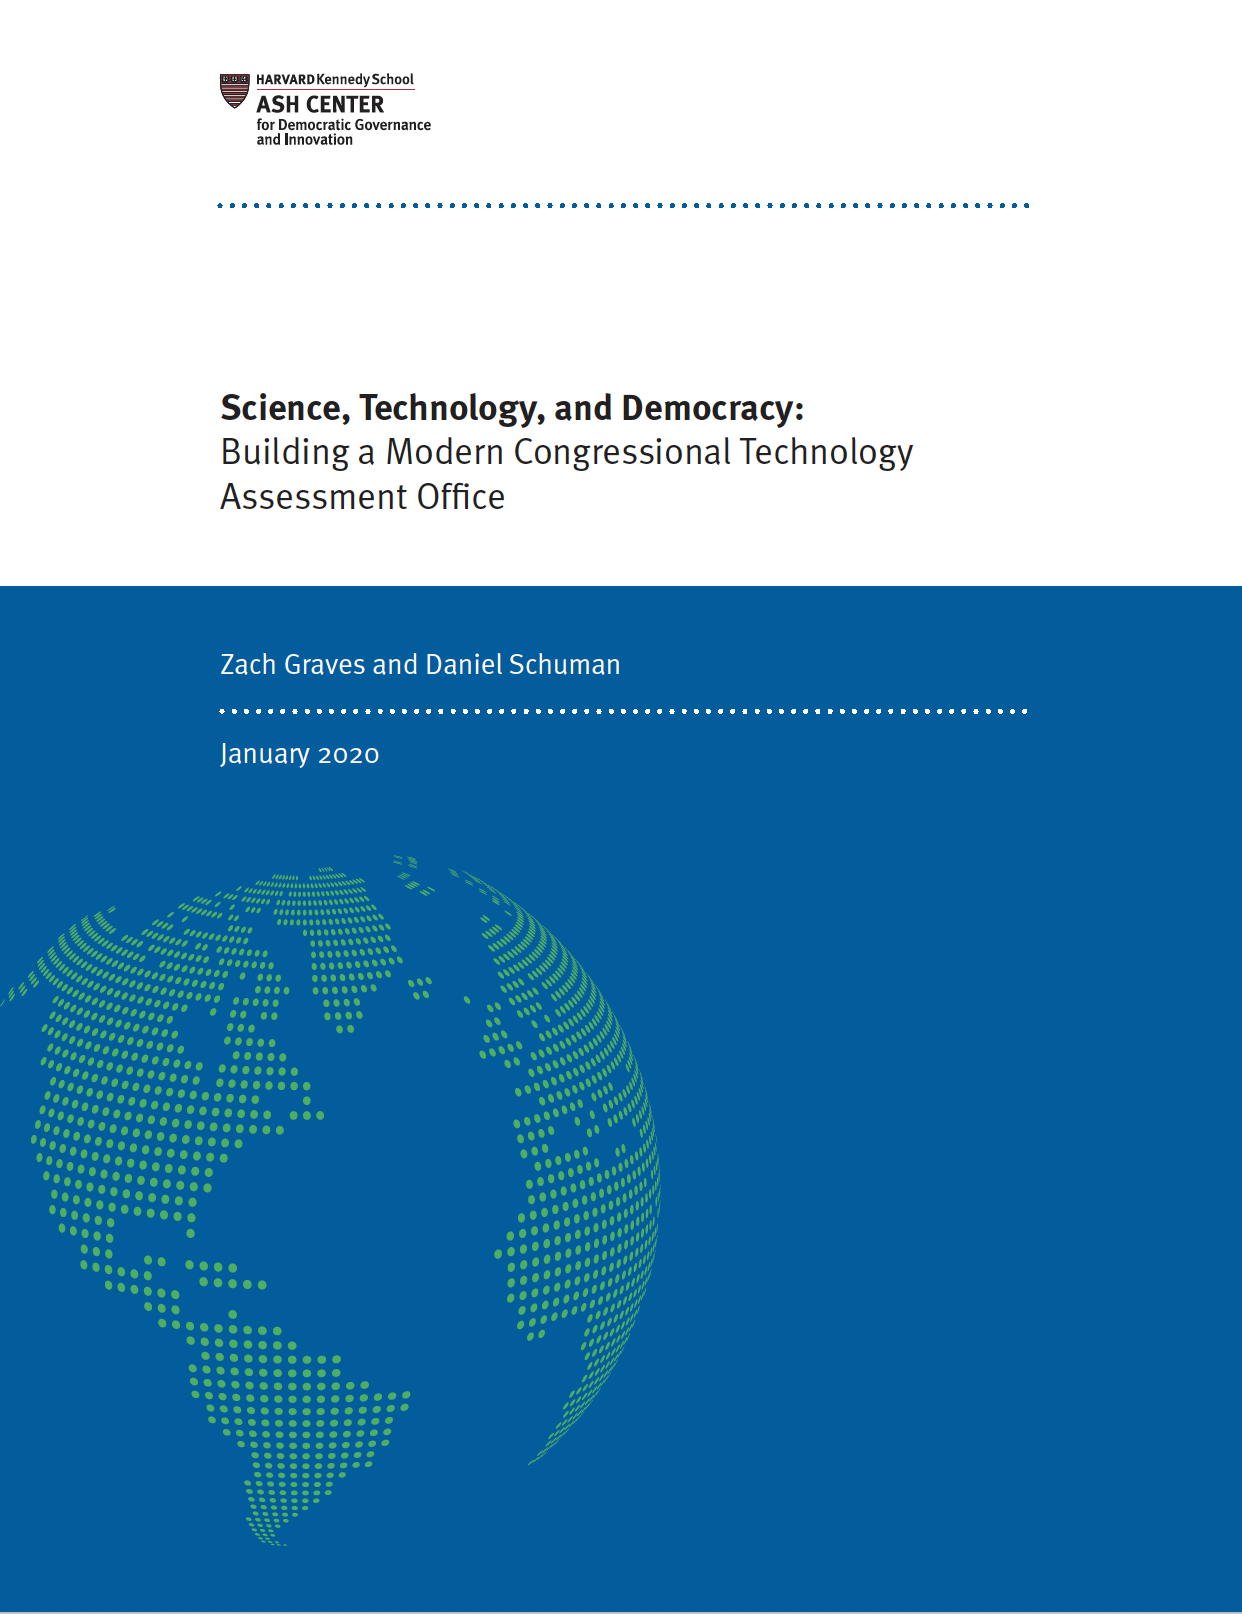 Science, Technology, & Democracy: Building a Modern Congressional Technology Assessment Office